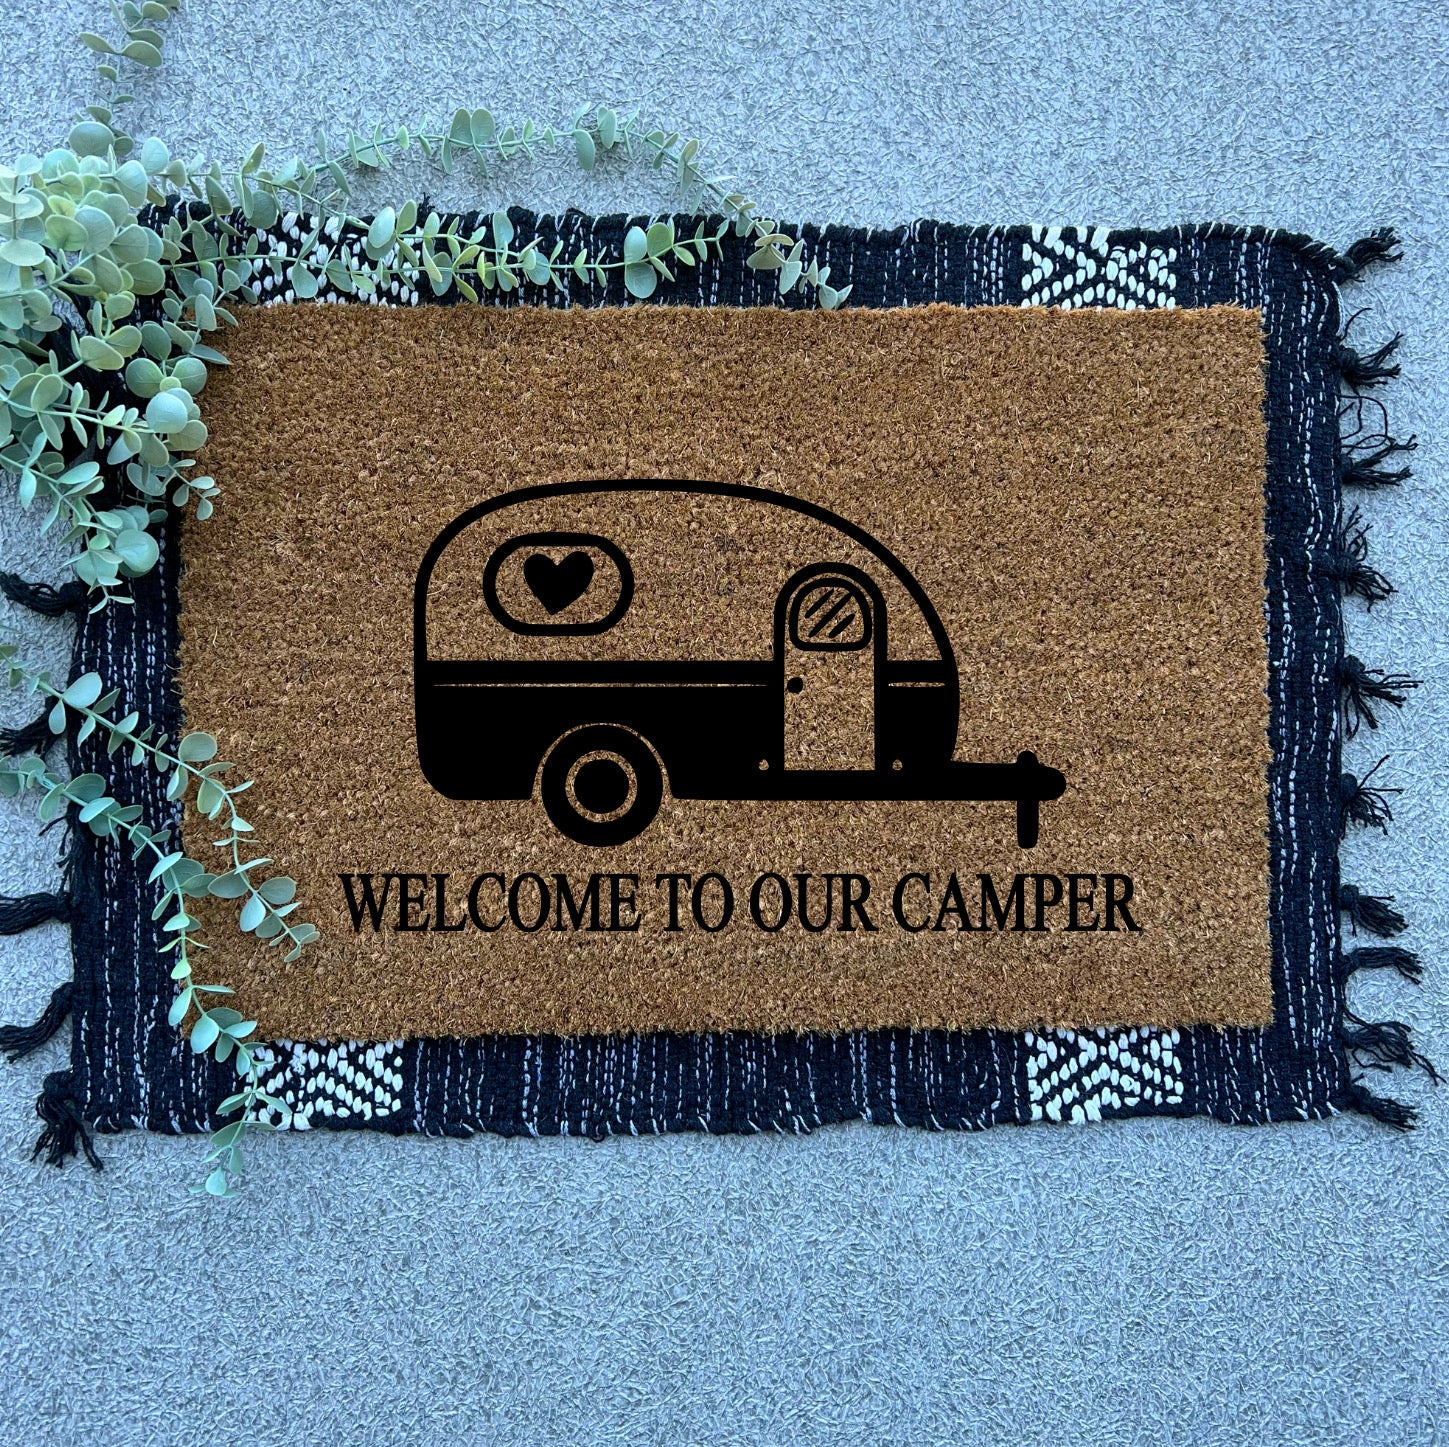 Welcome to Our Camper